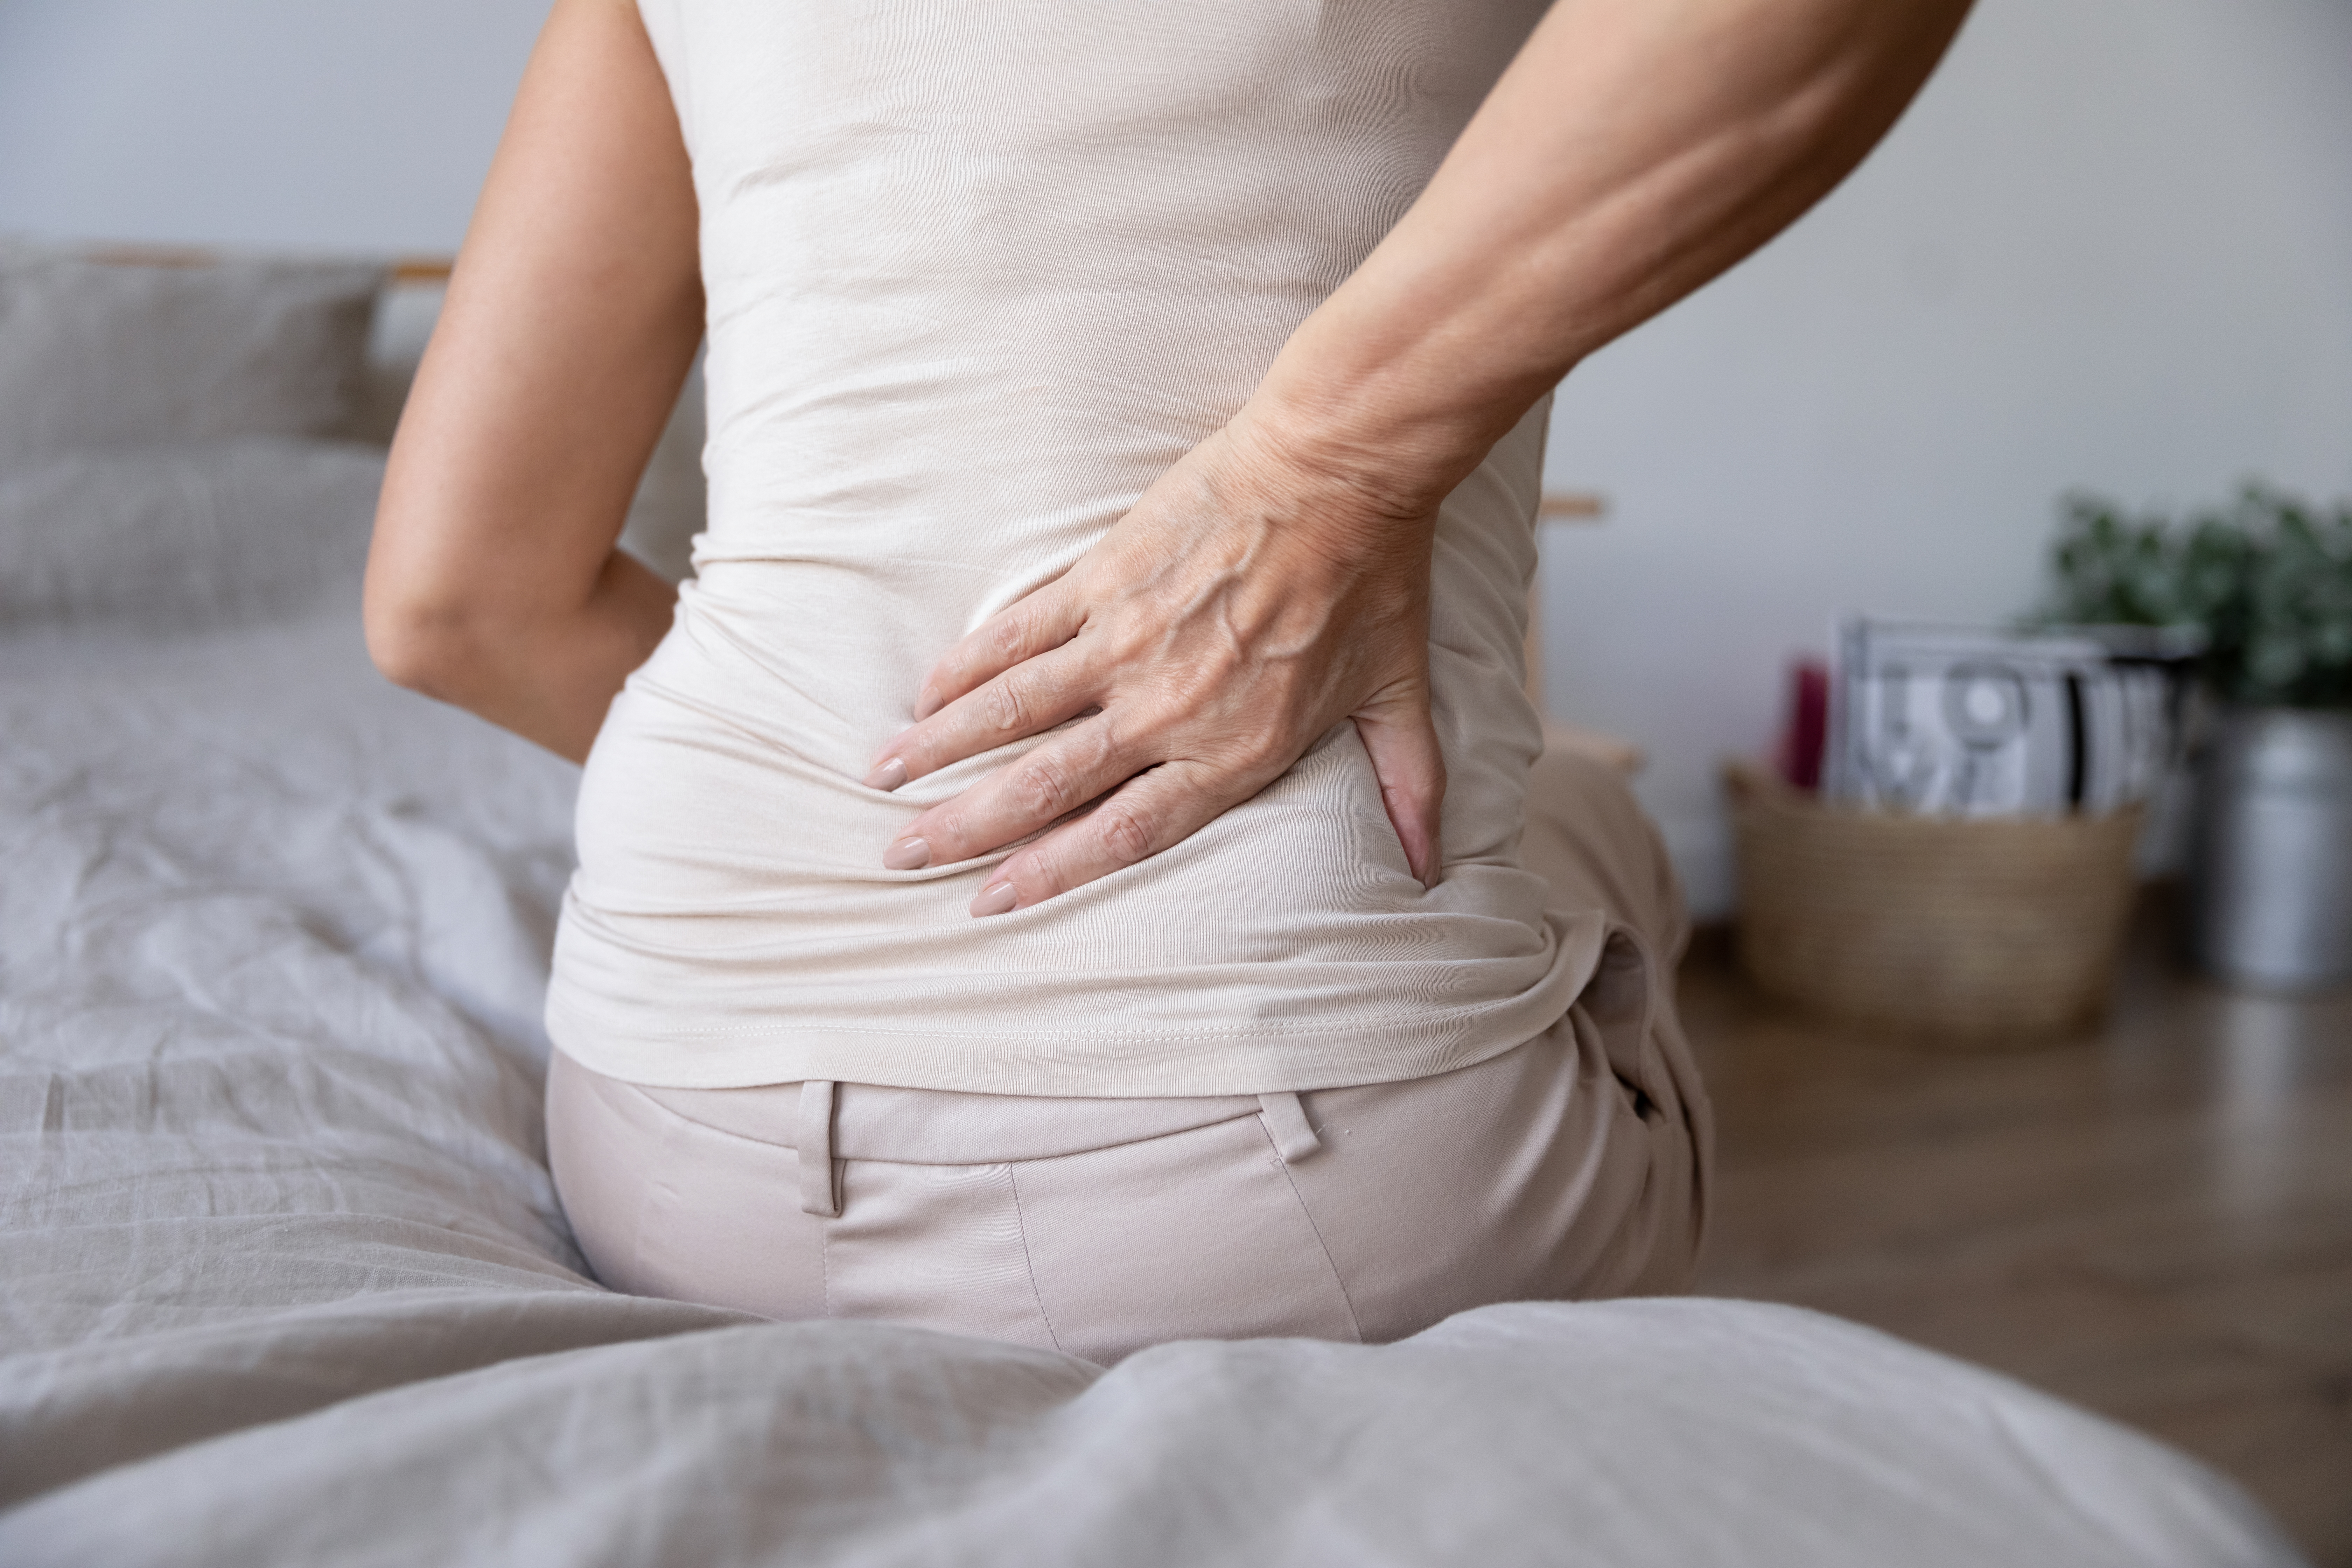 Taming the pain of sciatica: For most people, time heals and less is more -  Harvard Health